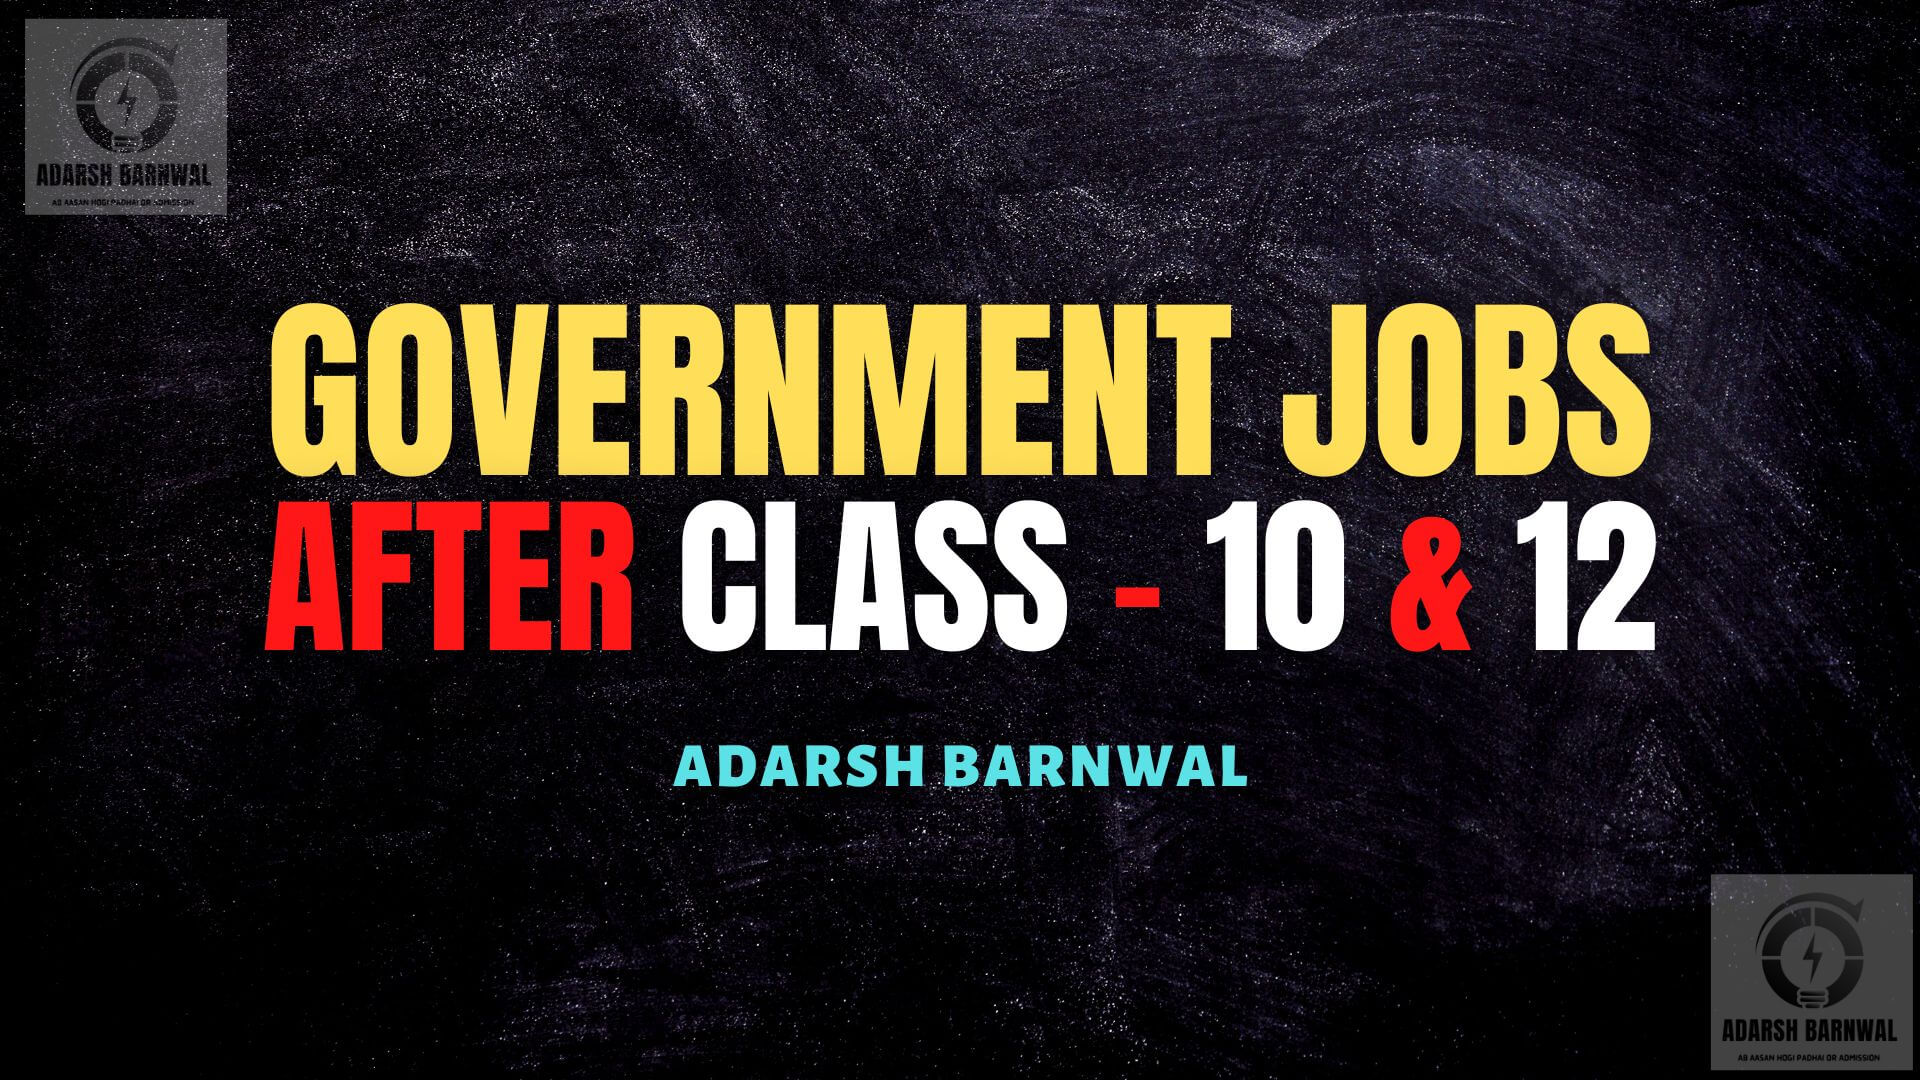 Government Jobs after class 10 & Class 12 By adarsh barnwal